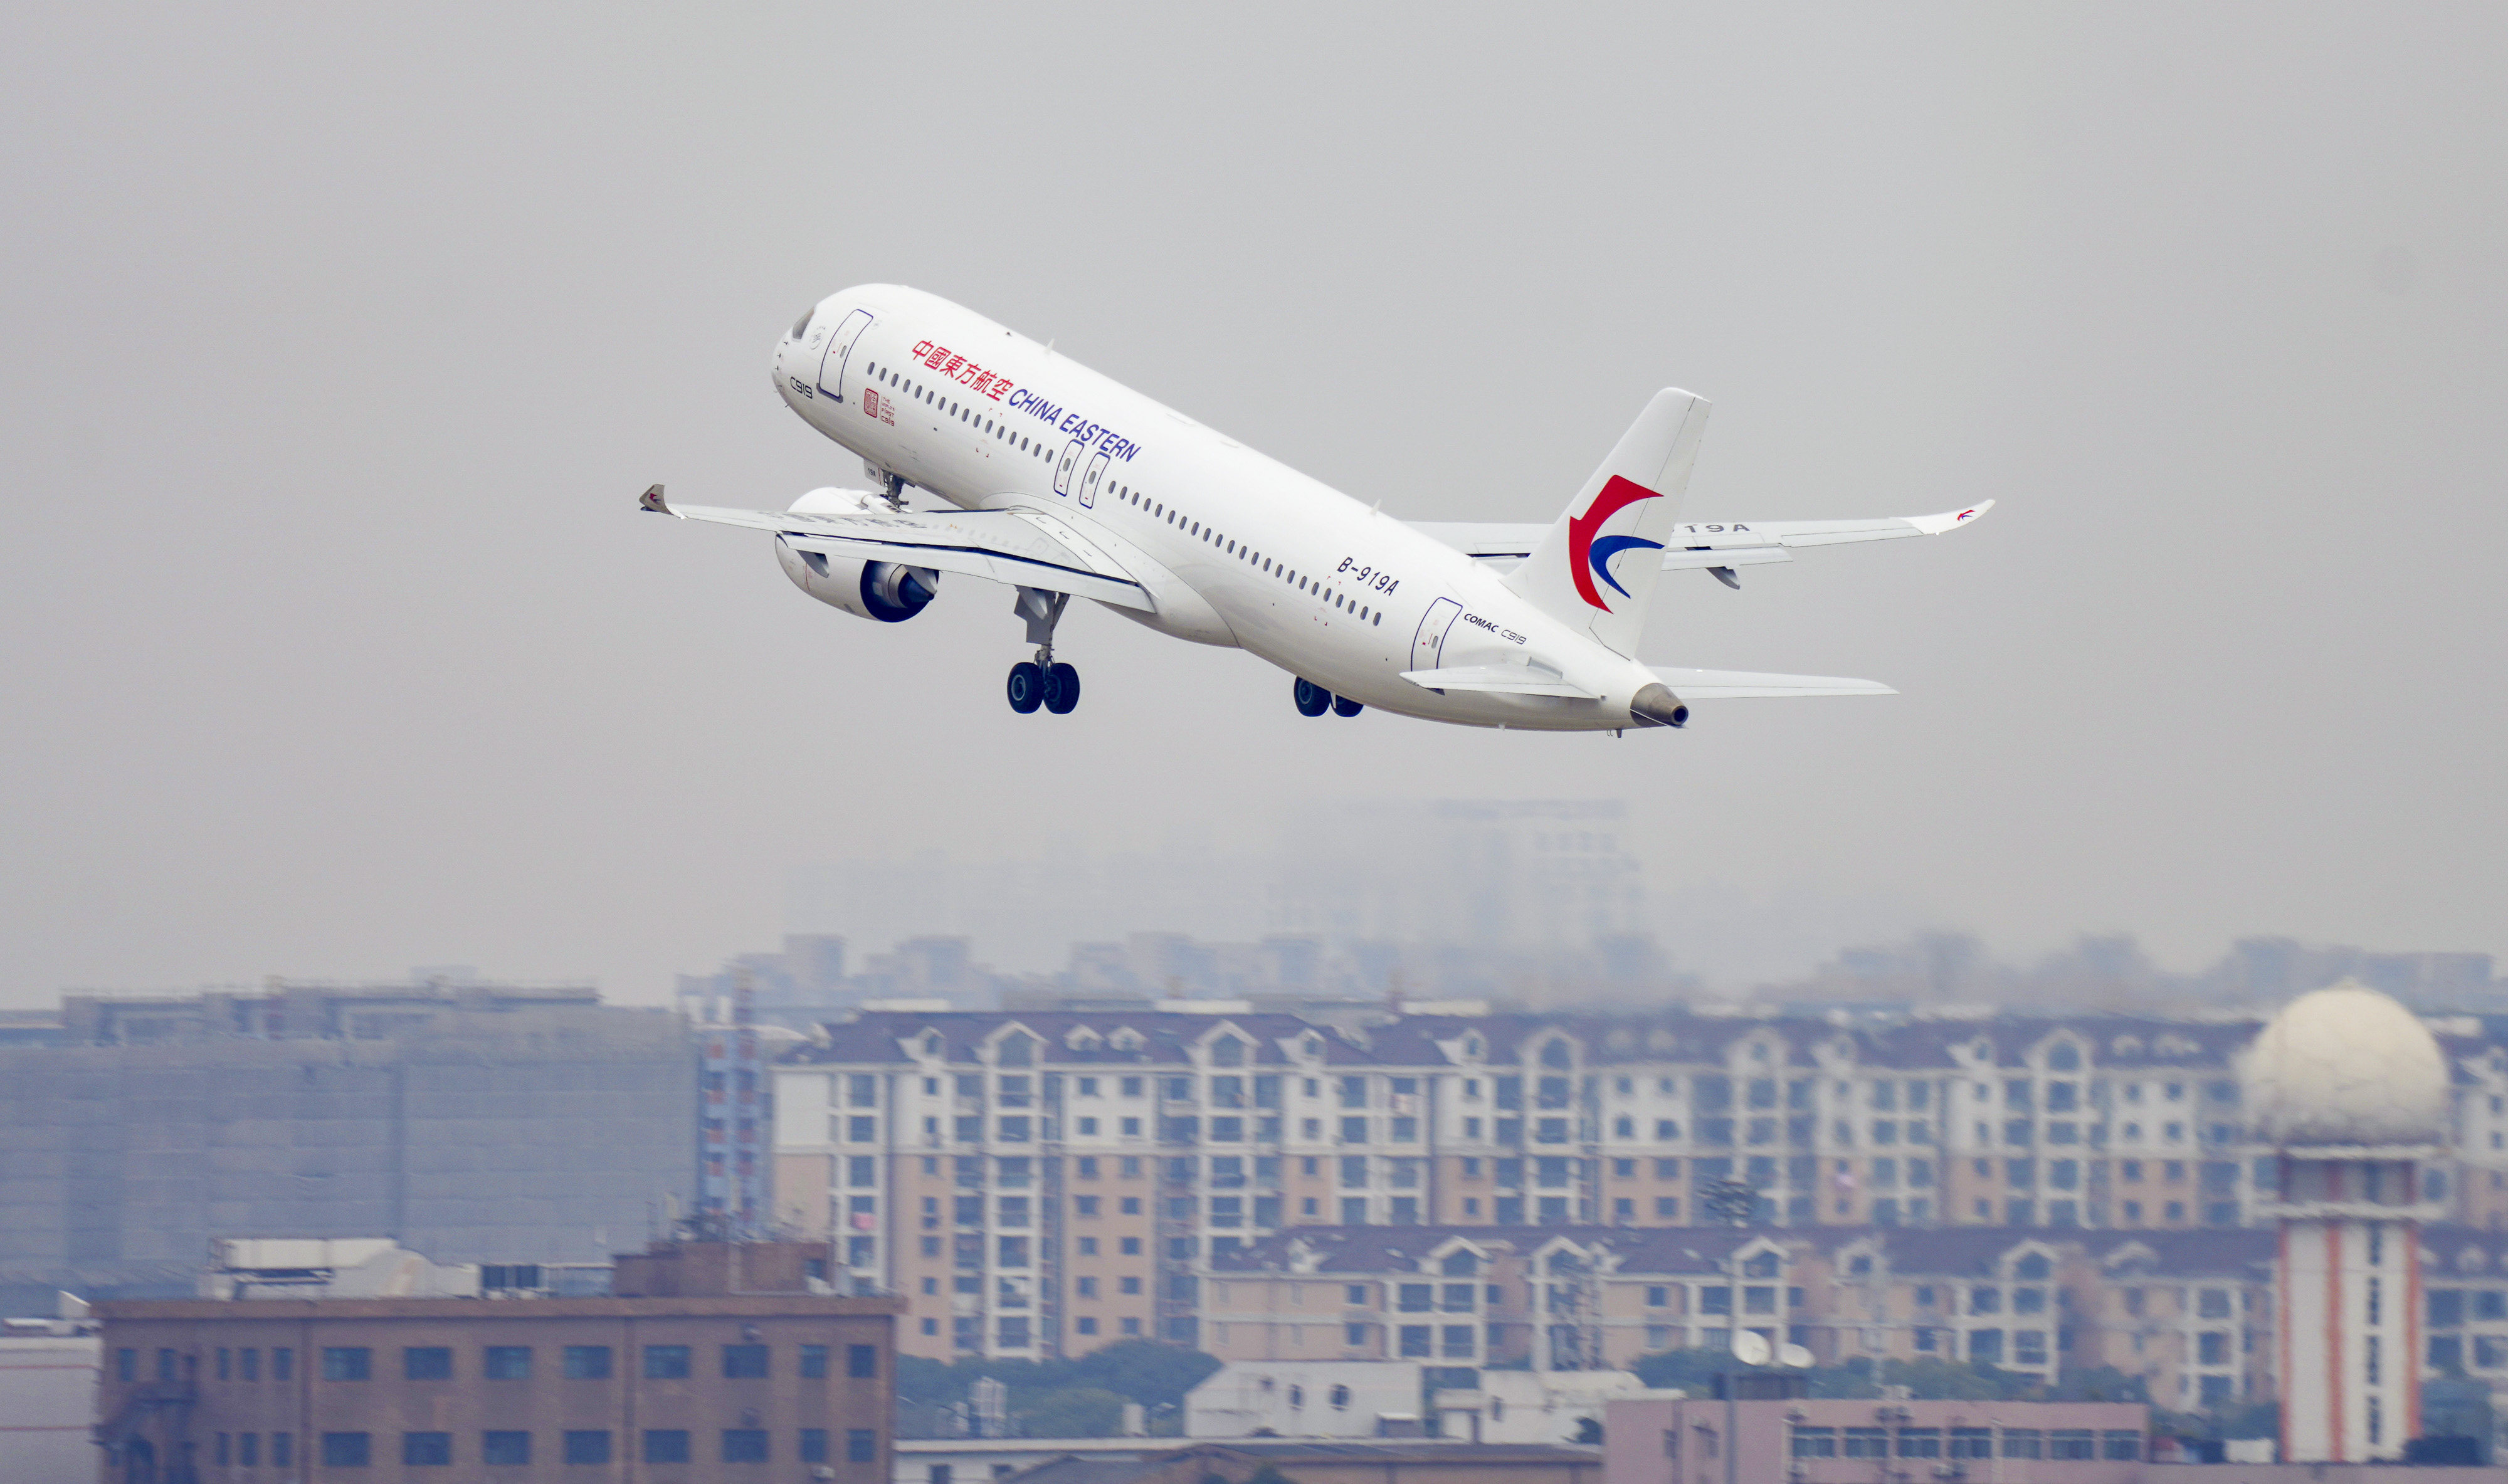 China Eastern Airlines will operate the first commercial flights of China’s home-grown C919 jet at the weekend. Photo: Xinhua